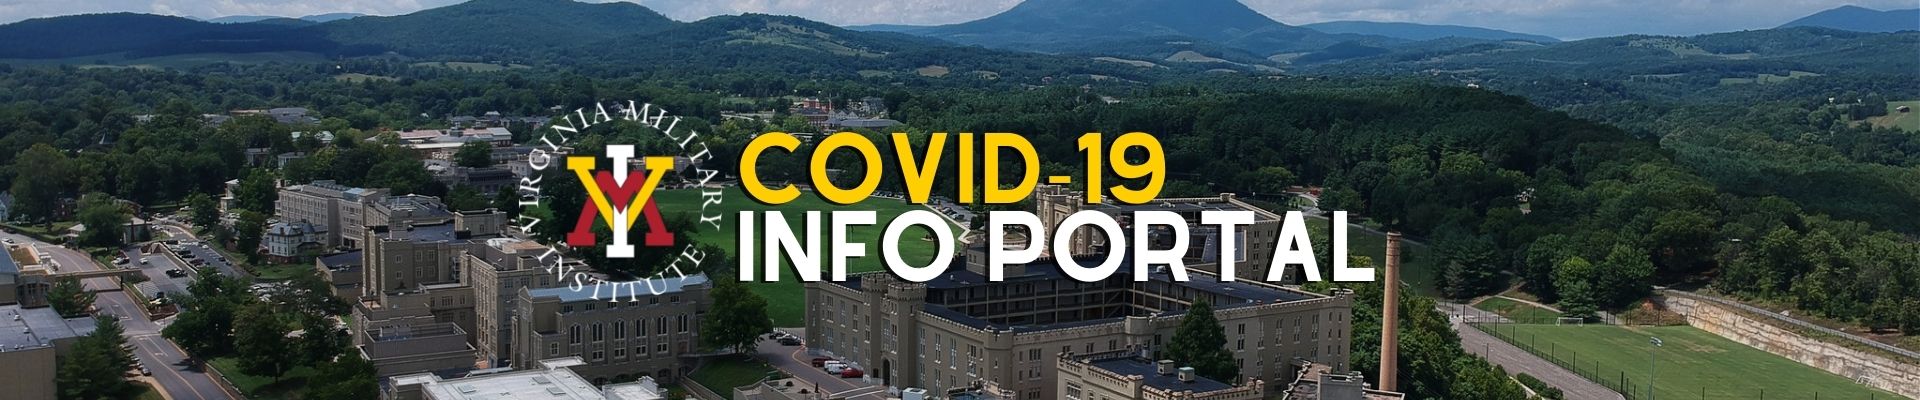 Aerial photo of post with logo and text of COVID-19 Info Portal